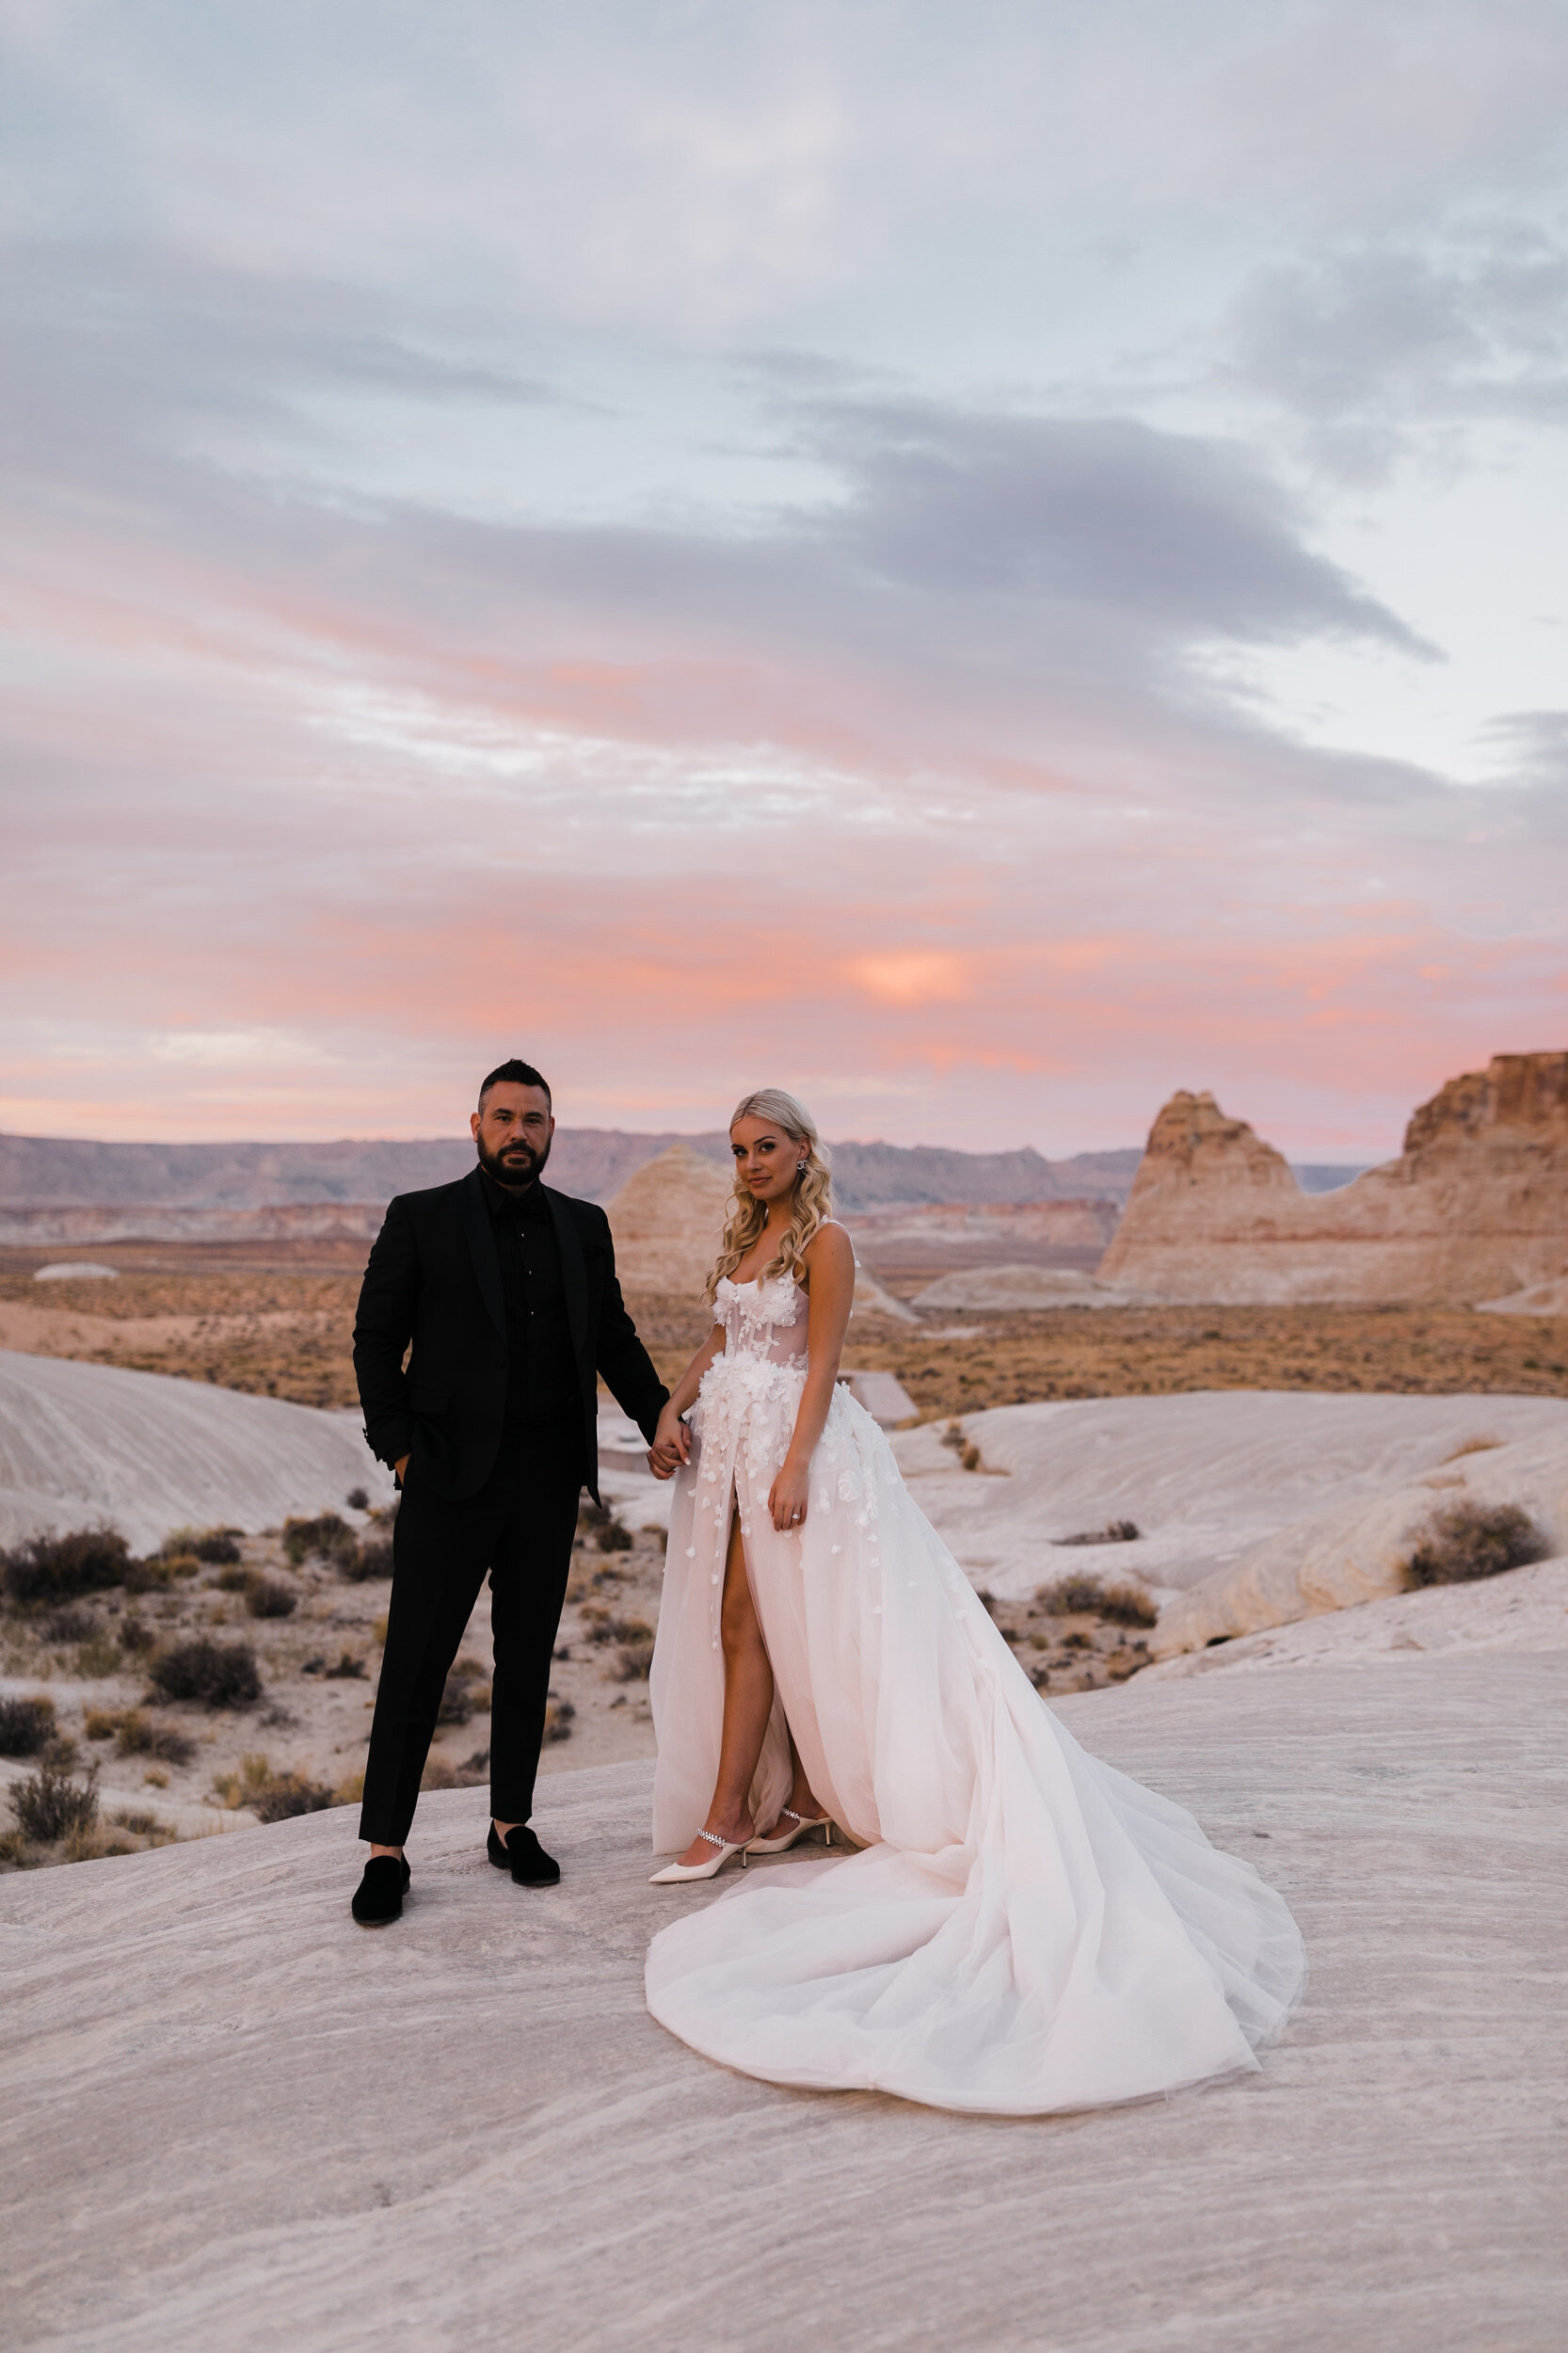 Stylish Elopement at Amangiri Resort in Utah | Best of 2020, Our Favorite Wedding Photos of the Year | The Hearnes Adventure Wedding Photography